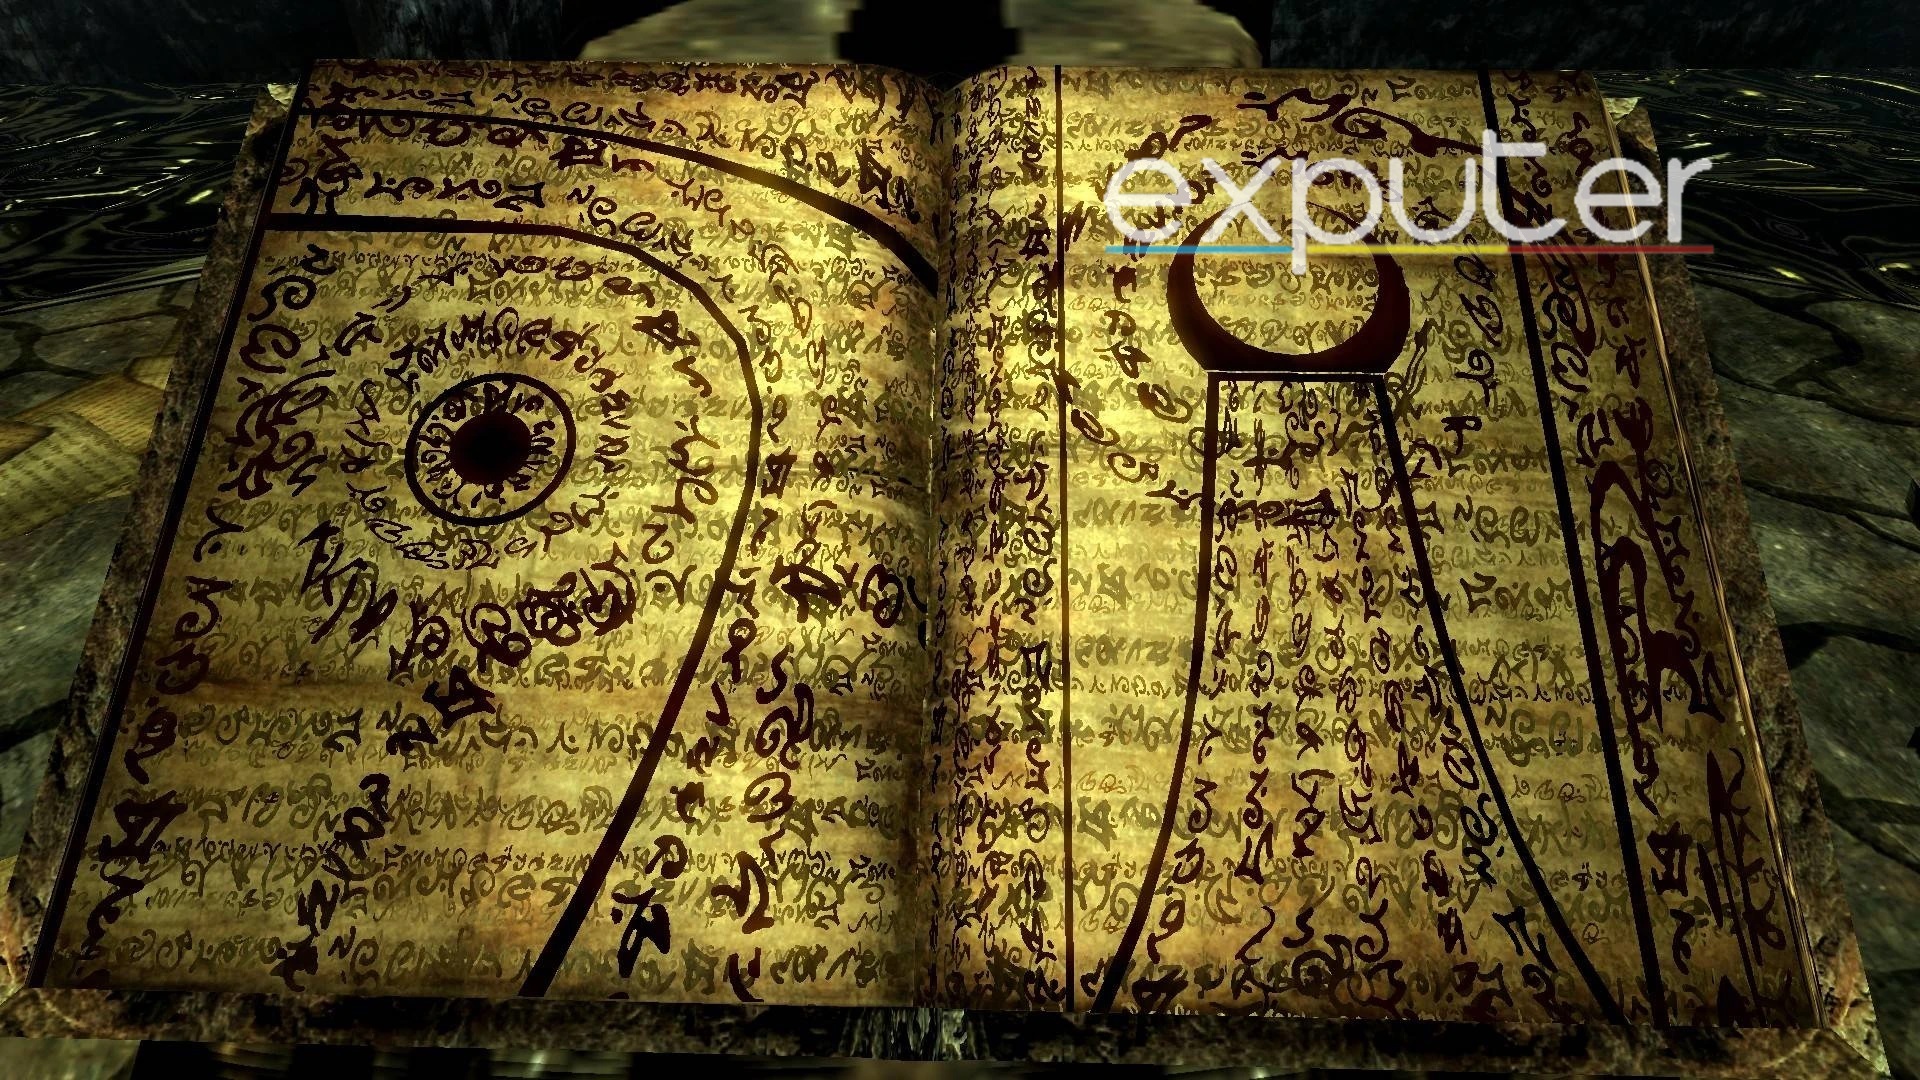 Skyrim Best Quests: The Black Book Quests 